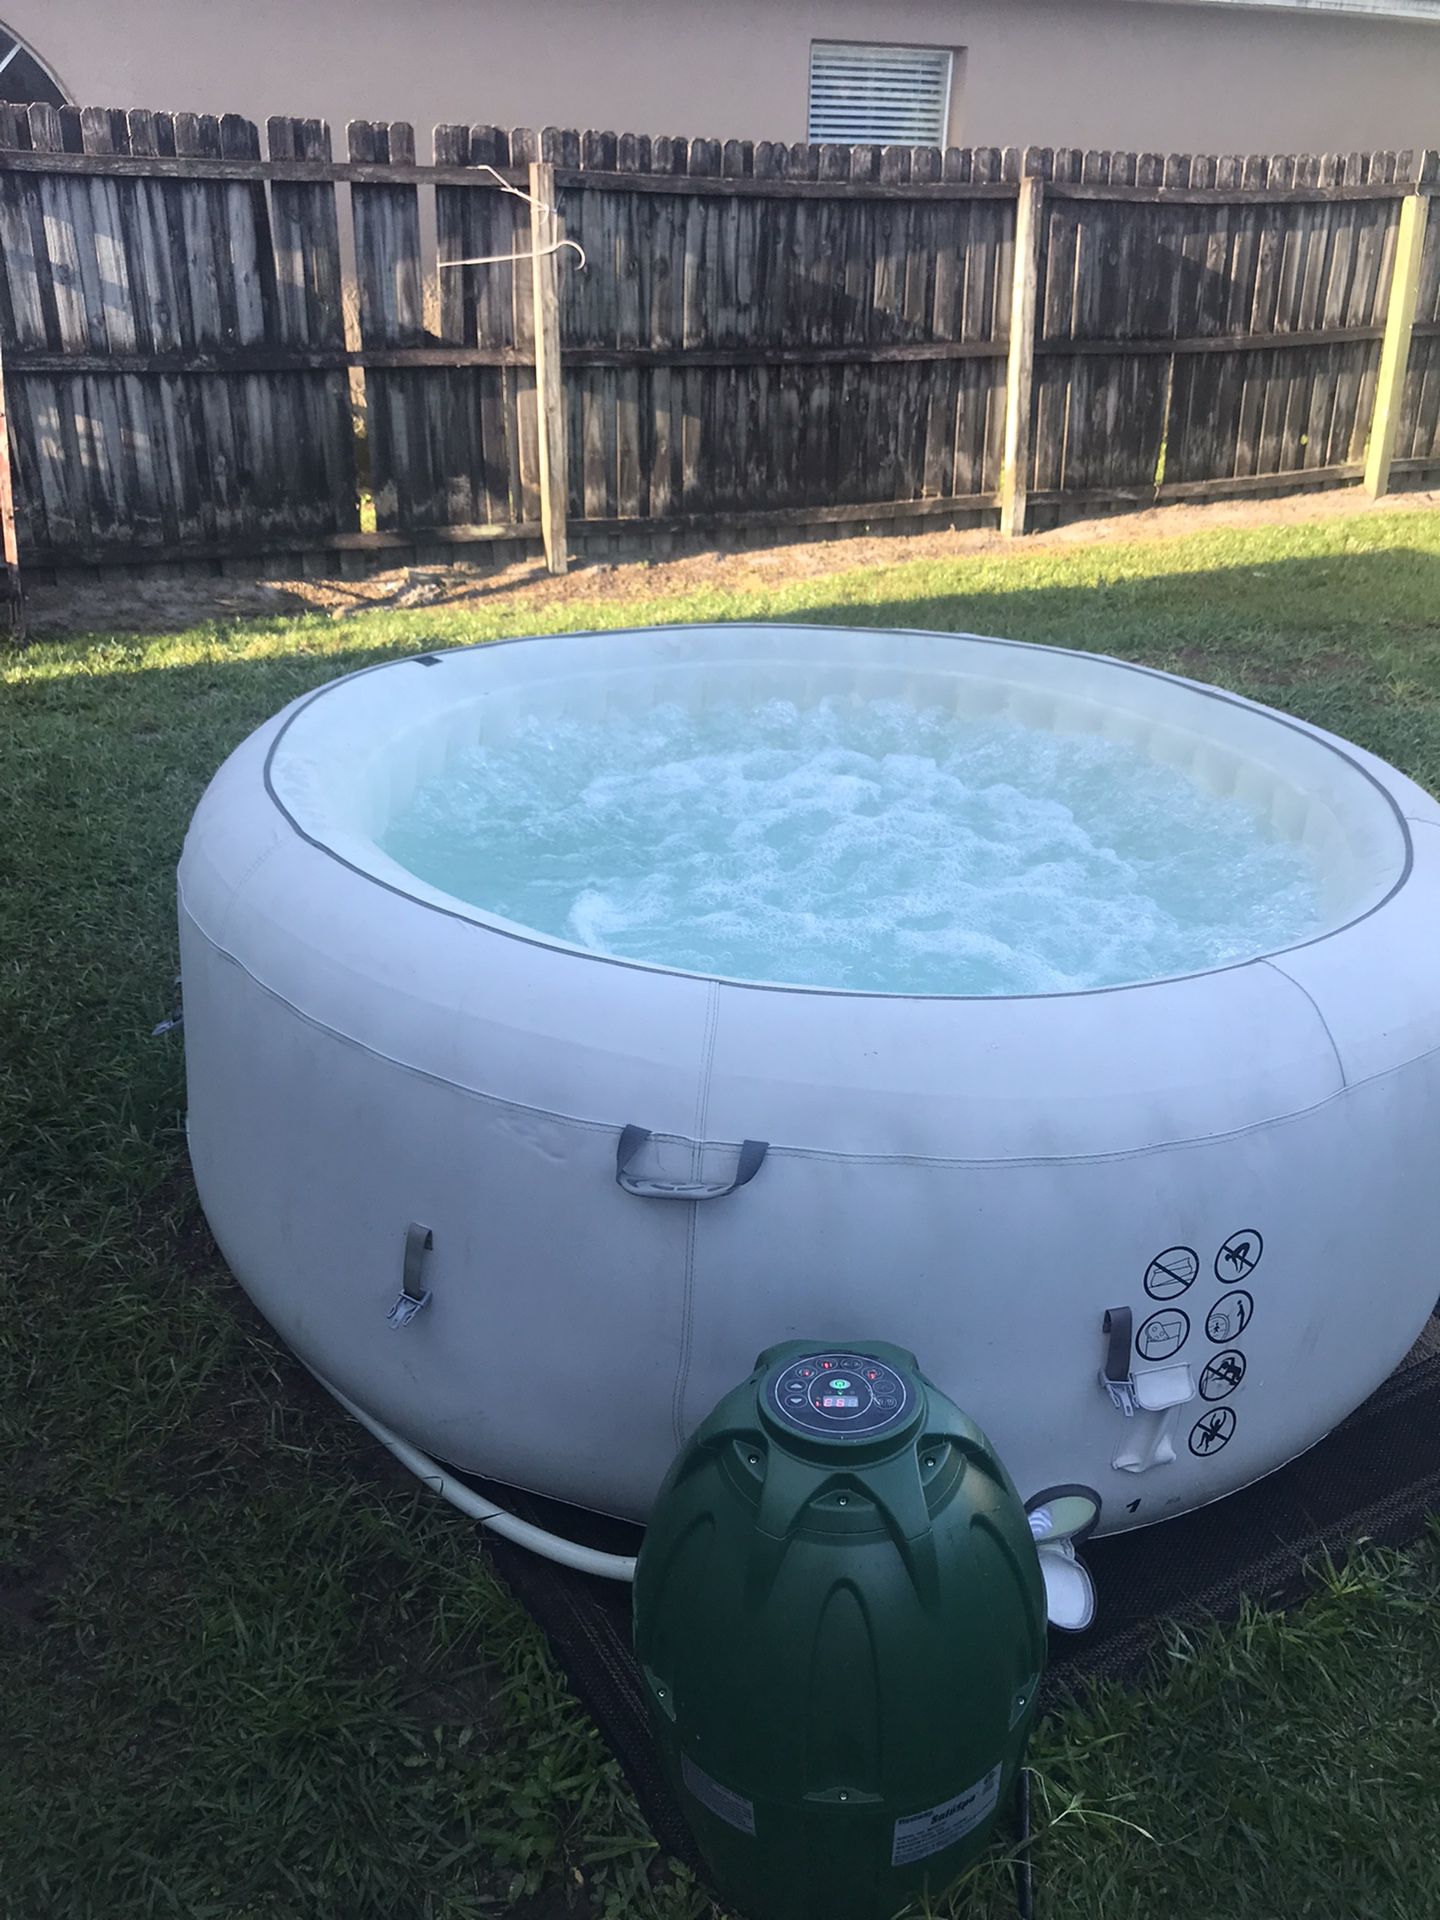 2 Used Hot Tubs For Parts …… 